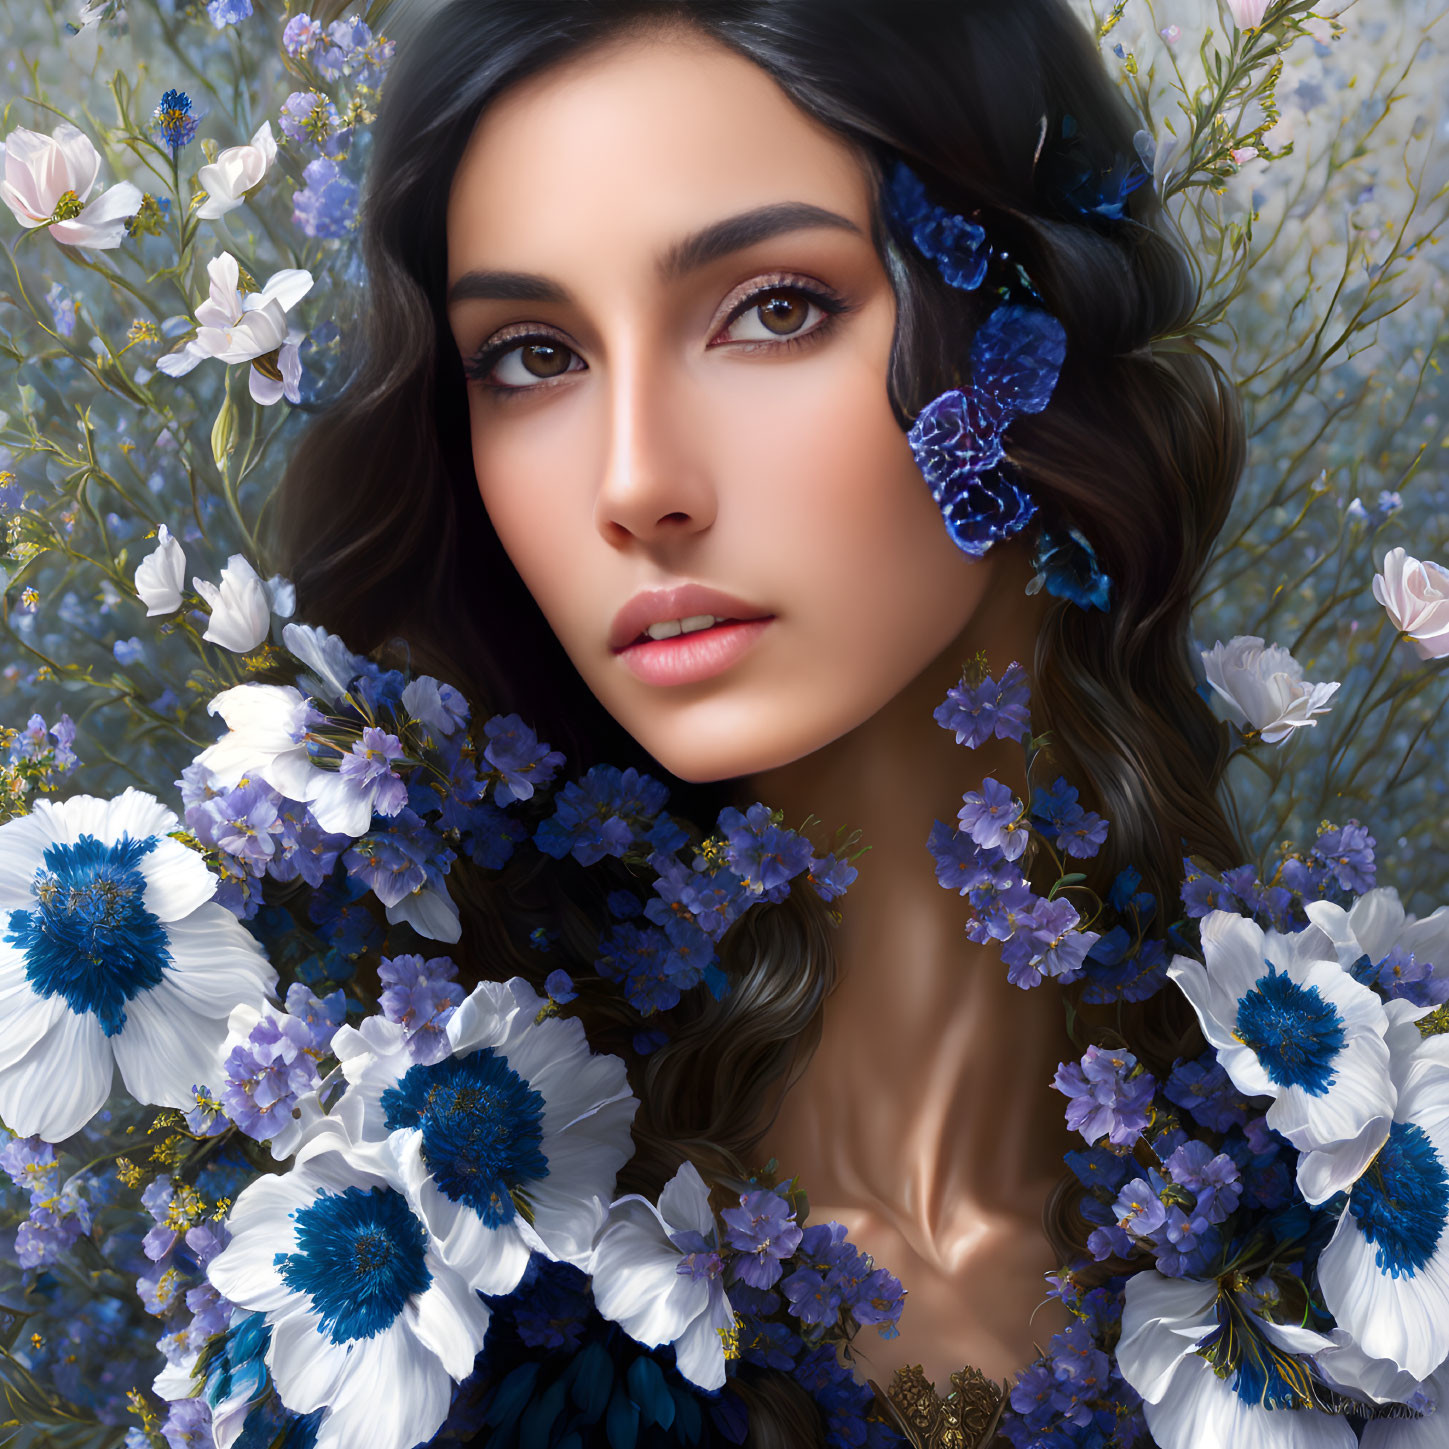 Woman with Blue and White Flowers and Butterfly in Hair gazes softly in Floral Setting